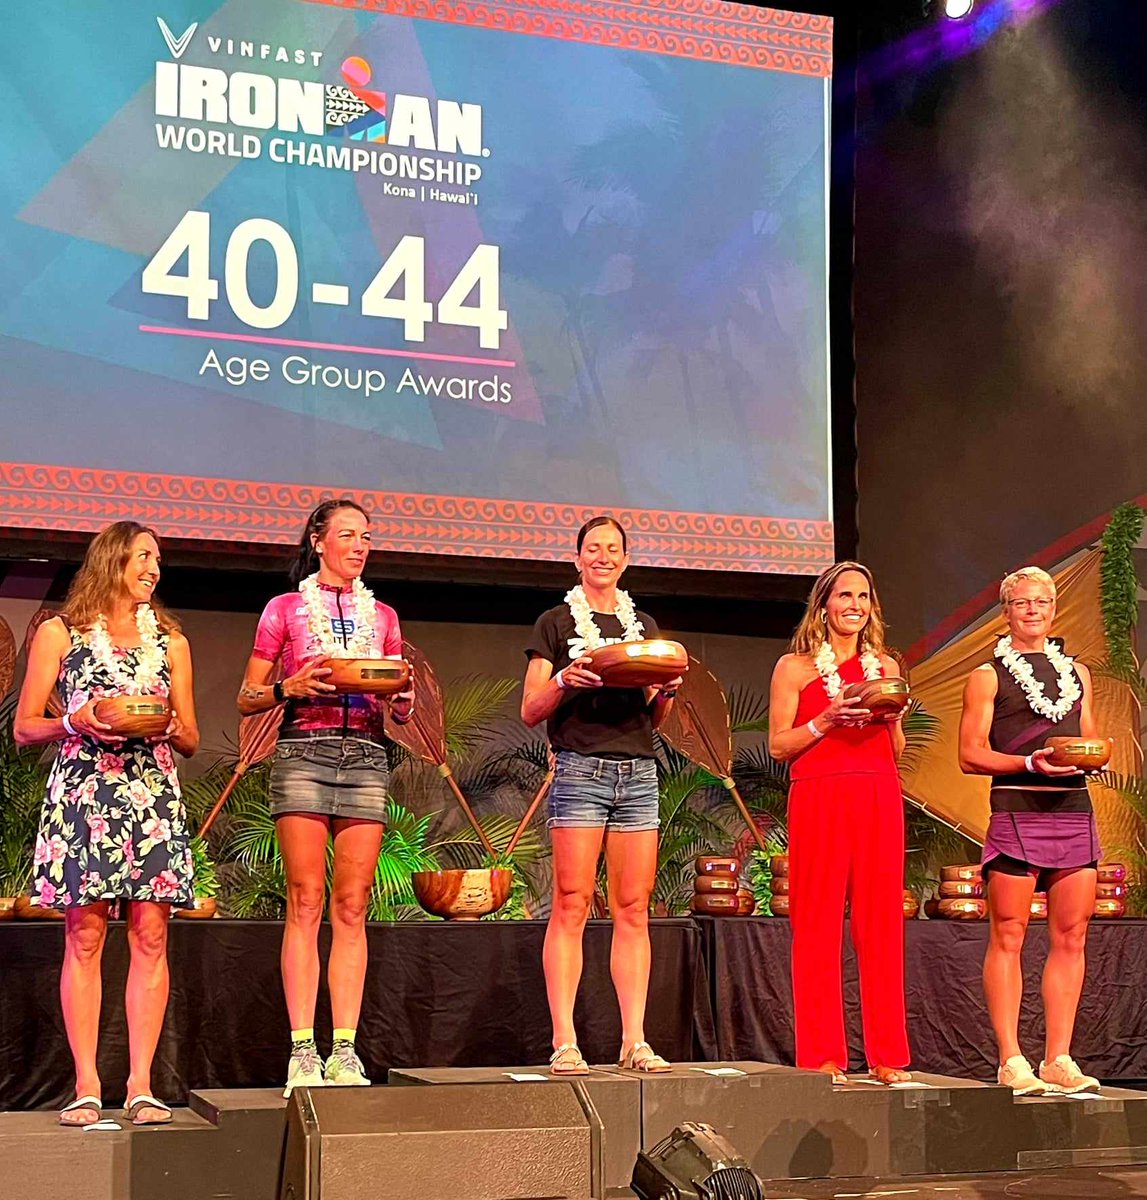 DREAMS COME TRUE - Podium at the #ironmanworldchampionship in Kona, Hawaii. Raced my heart out finishing 3.8km swim, 180km bike, 42.2 km run in 10h01 in Kona's heat, humidity & wind -> laying 1h motion-less in the recovery zone behind the finish line. 100% worth it. @ARMILabs